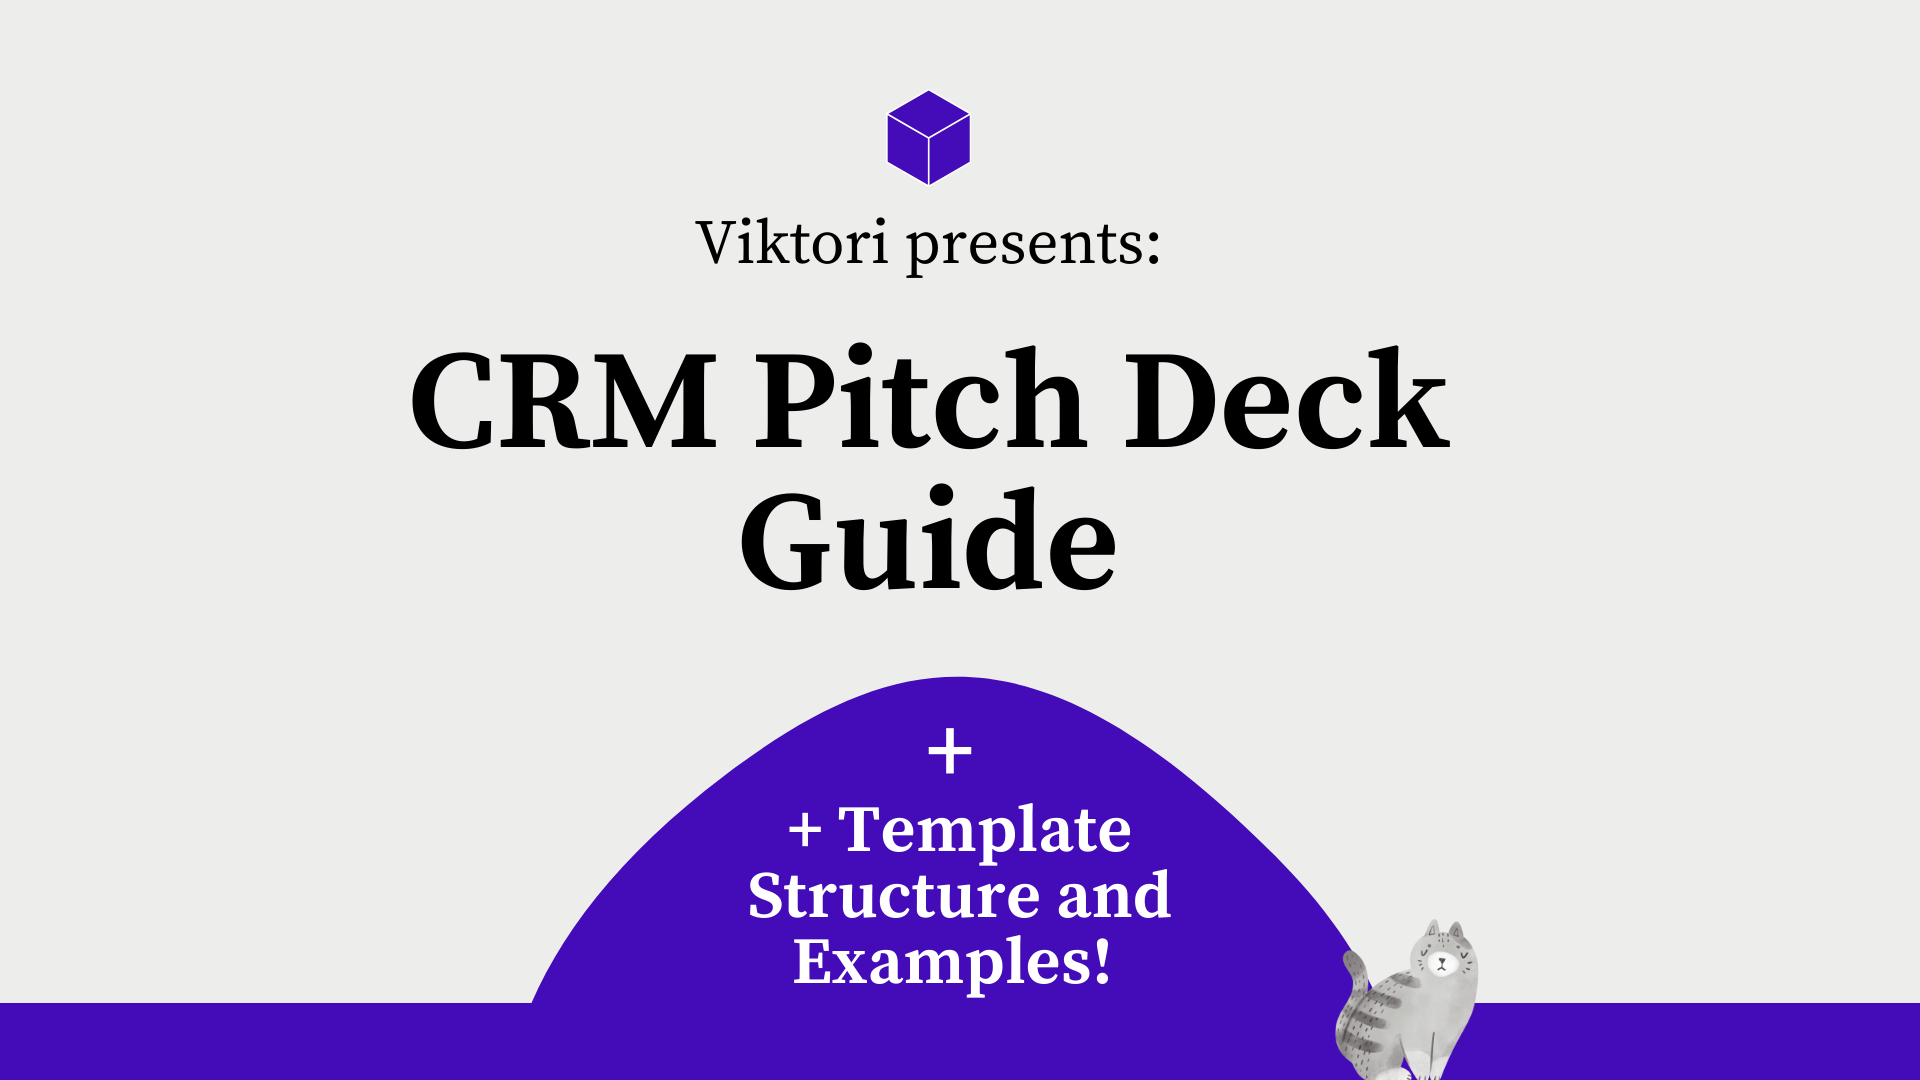 CRM Pitch Deck Guide